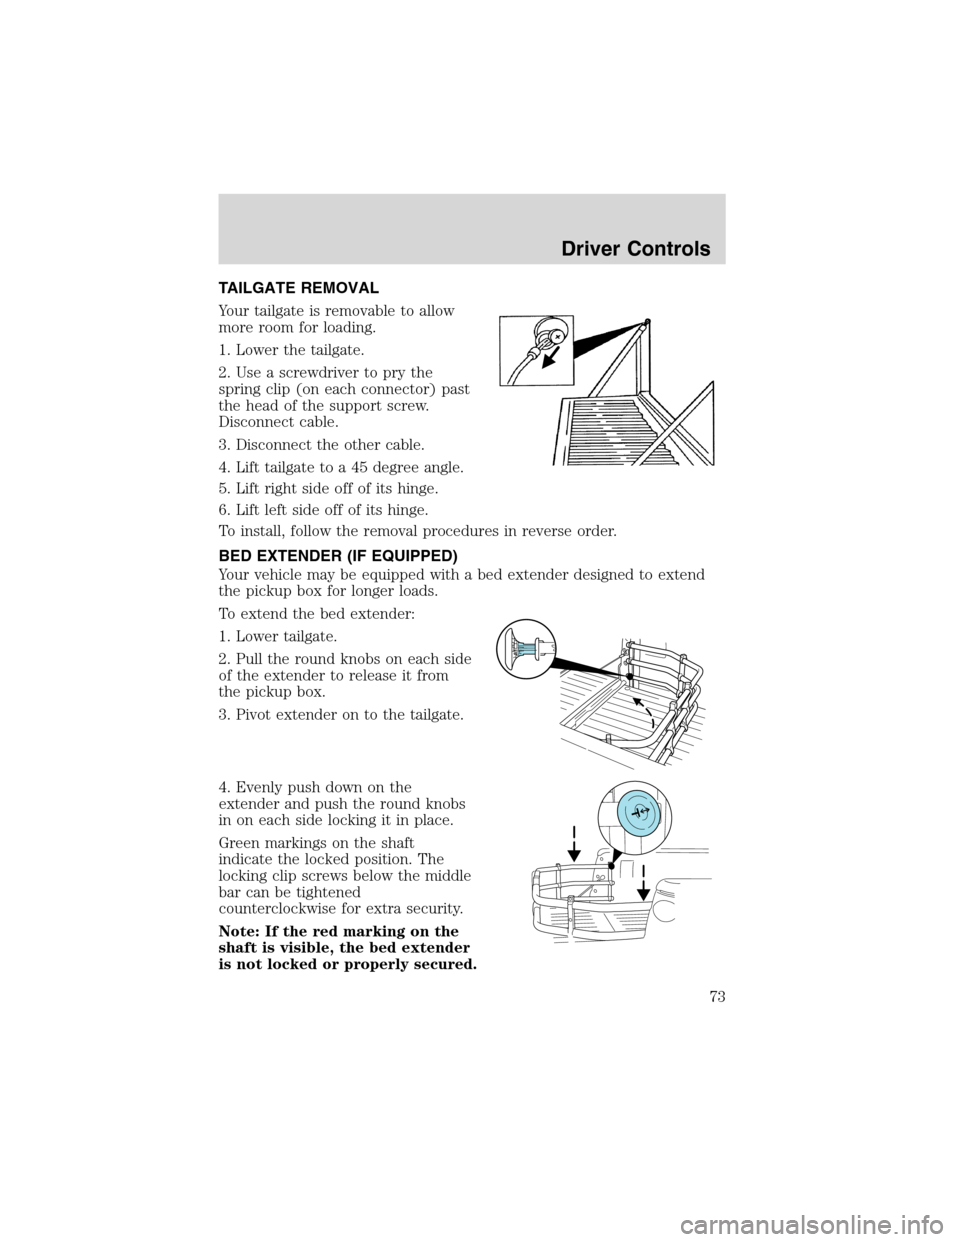 LINCOLN BLACKWOOD 2003 Manual PDF TAILGATE REMOVAL
Your tailgate is removable to allow
more room for loading.
1. Lower the tailgate.
2. Use a screwdriver to pry the
spring clip (on each connector) past
the head of the support screw.
D